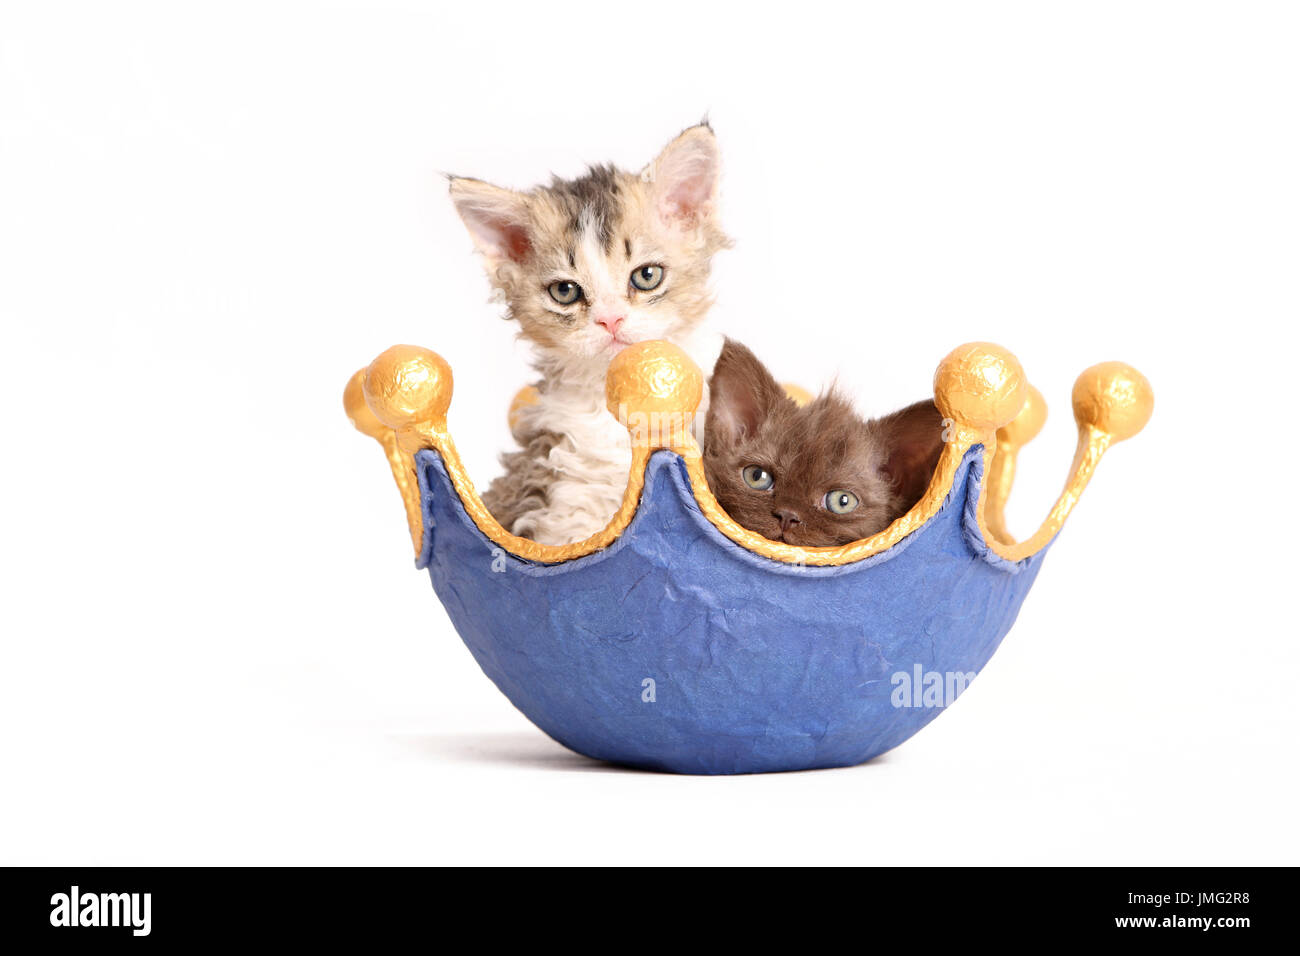 Selkirk Rex. Pair of kittens (6 weeks old) in a dish, shaped like a crown. Studio picture against a white background. Germany Stock Photo